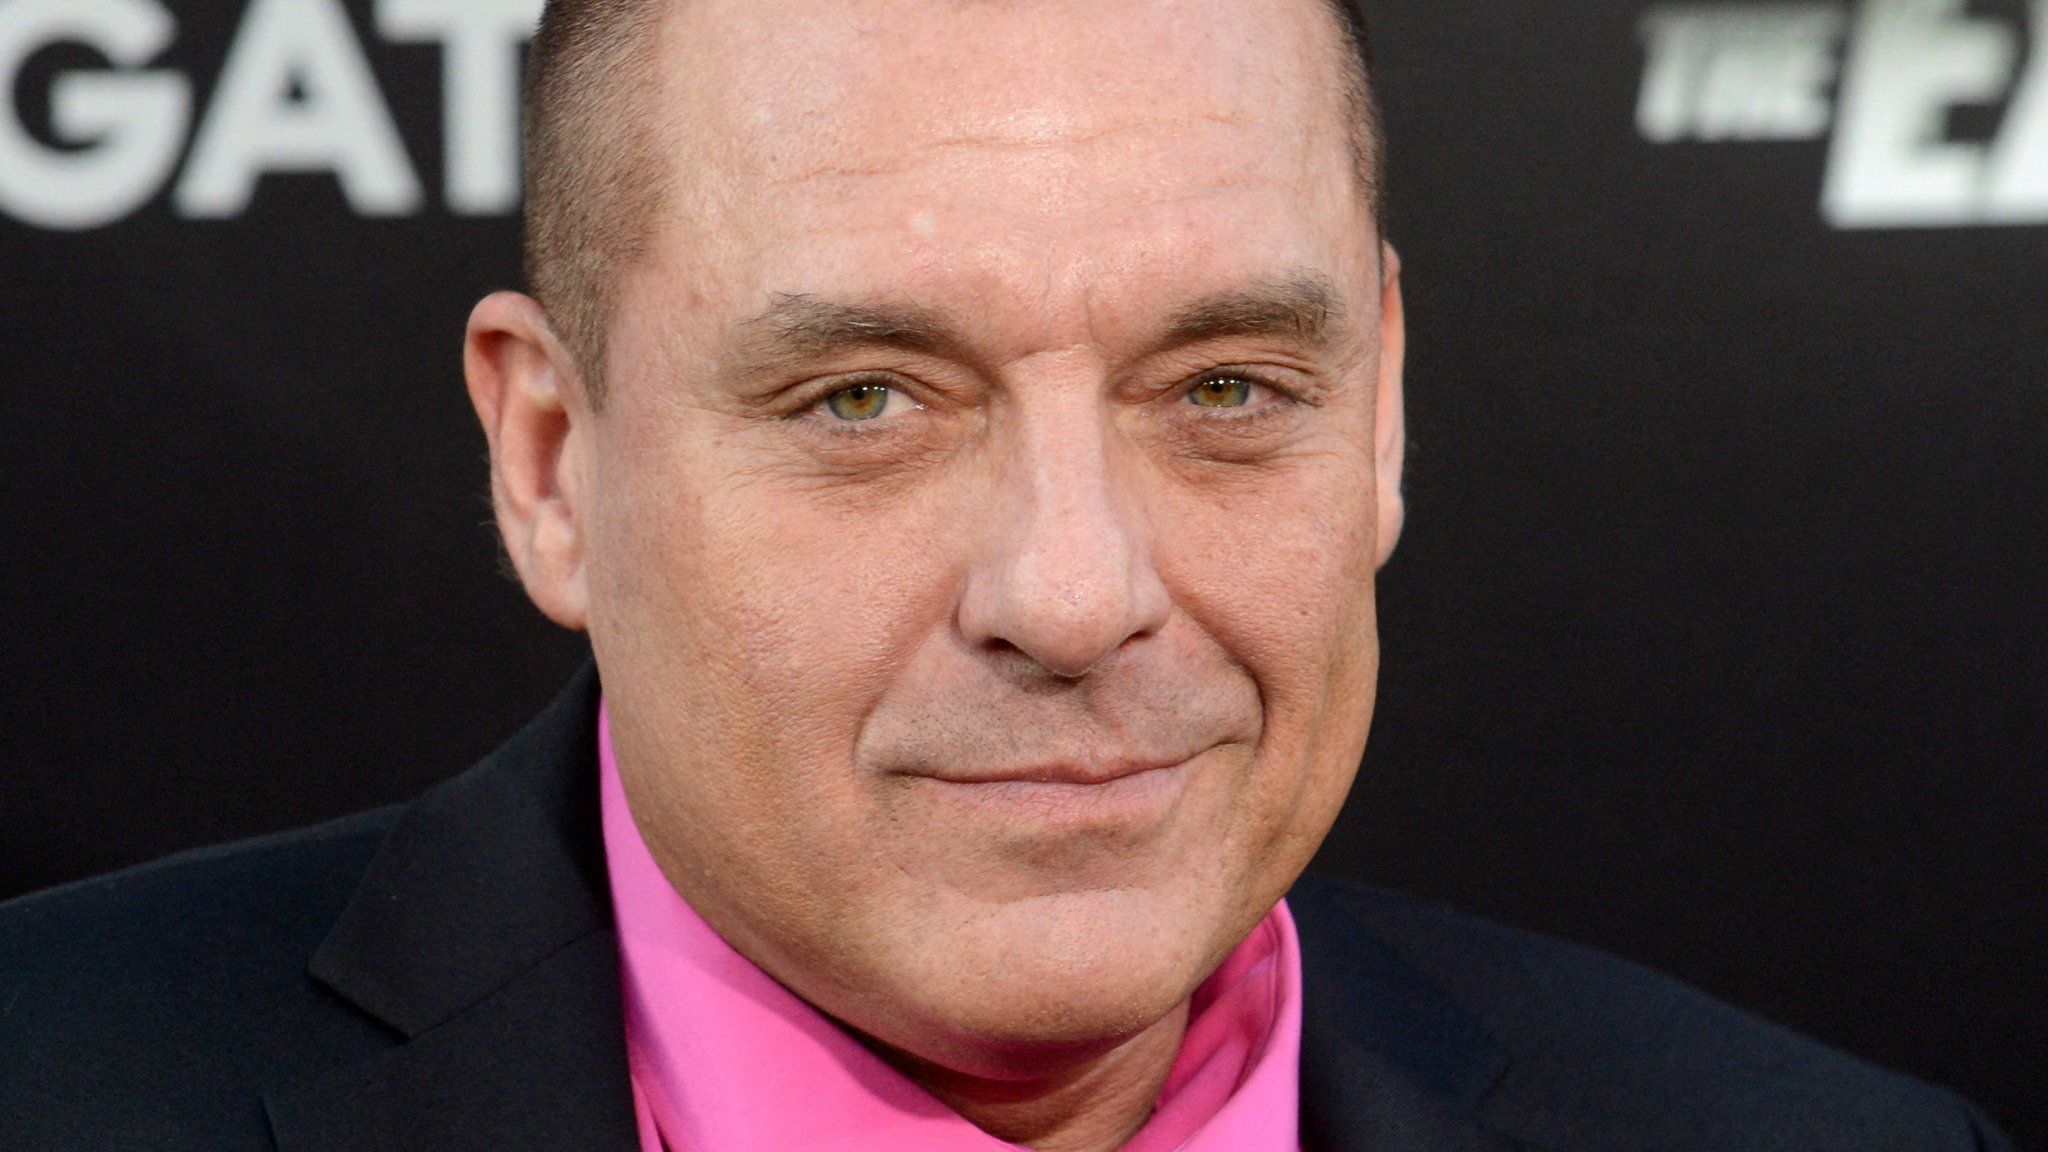 Tom Sizemore attends the premiere of the film "The Expendables 3" in Los Angeles August 11, 2014